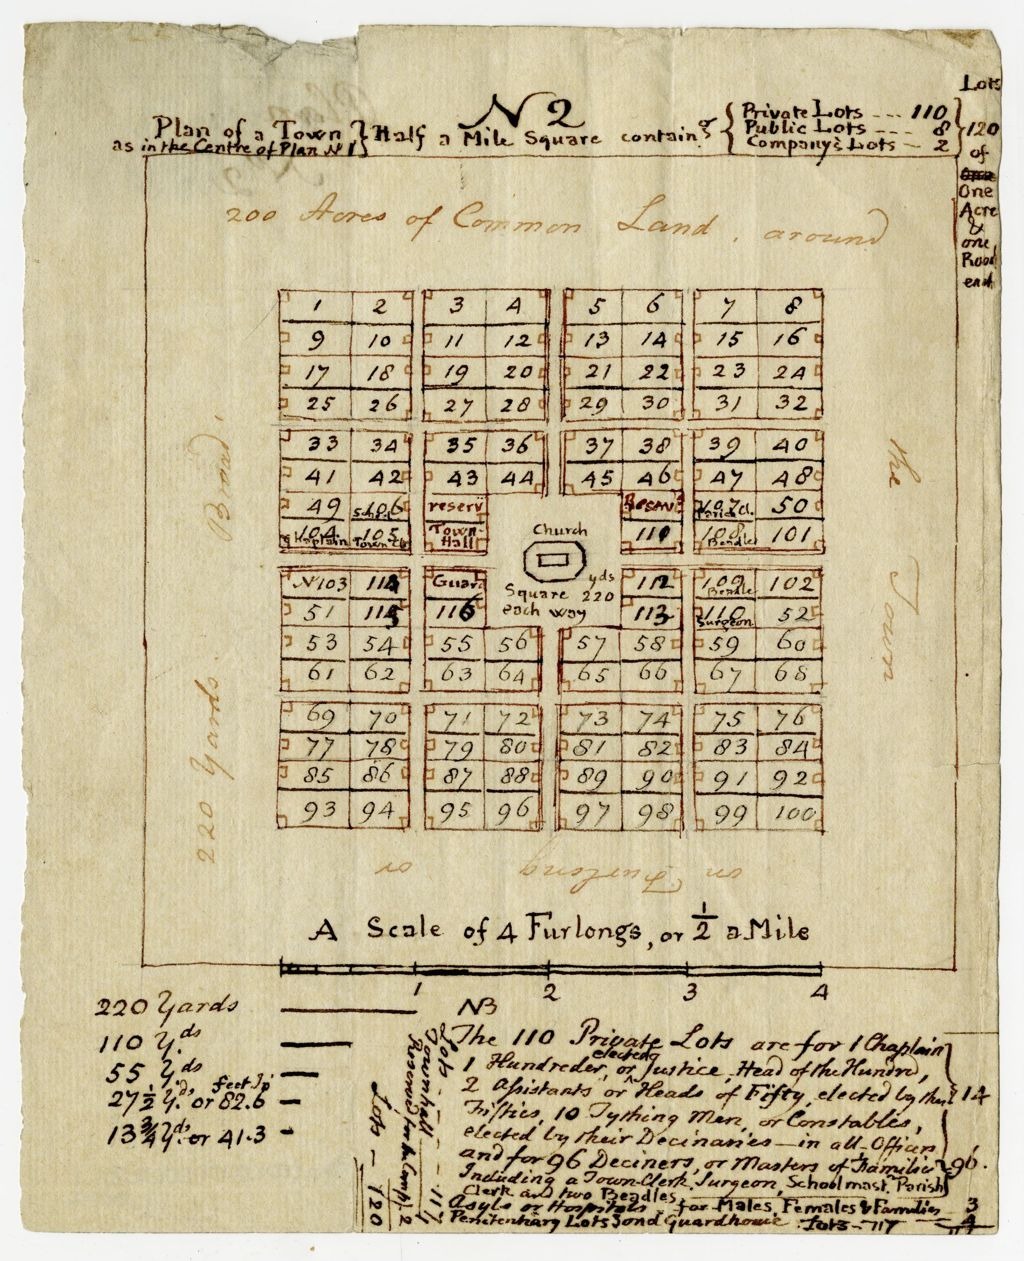 Miniature of Plan of a town